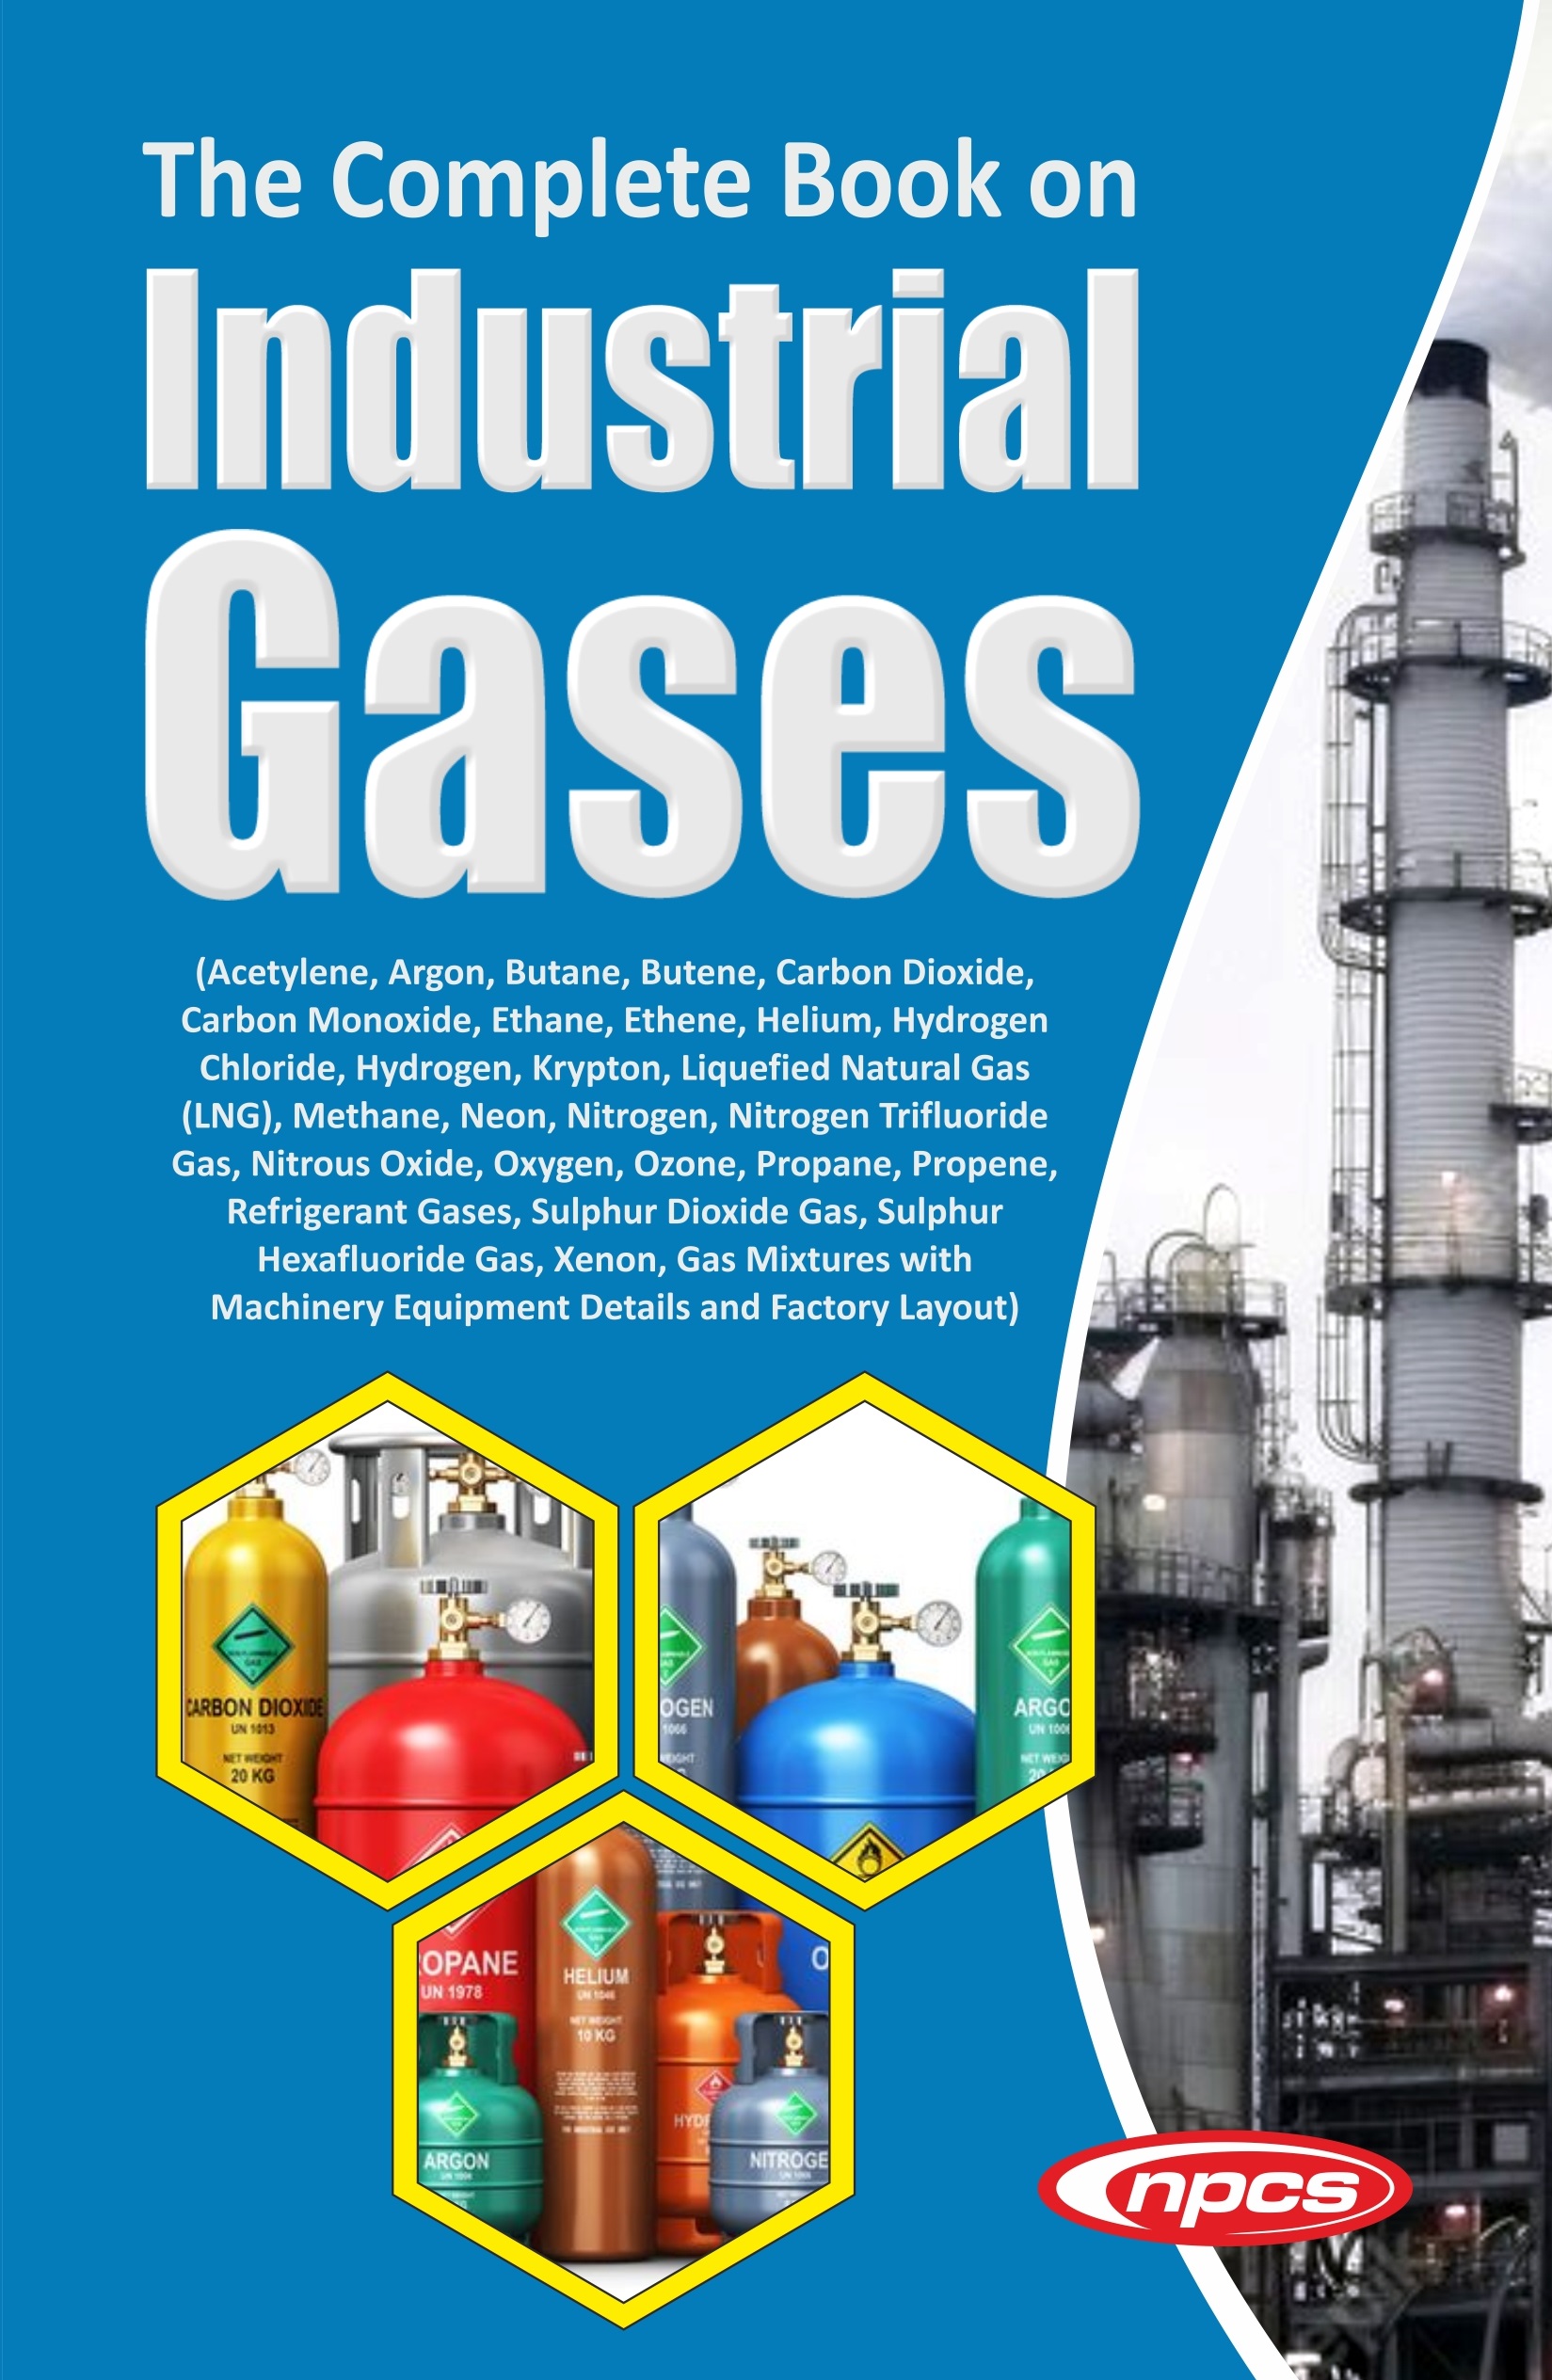 The Complete Book on Industrial Gases (Acetylene, Argon, Butane, Butene, Carbon Dioxide, Carbon Monoxide, Ethane, Ethene, Helium, Hydrogen Chloride, Hydrogen, Krypton, Liquefied Natural Gas (LNG), Methane, Neon, Nitrogen, Nitrogen Trifluoride Gas, Nitrous Oxide, Oxygen, Ozone, Propane, Propene, Refrigerant Gases, Sulphur Dioxide Gas, Sulphur Hexafluoride Gas, Xenon, Gas Mixtures with Machinery Equipment Details and Factory Layout)